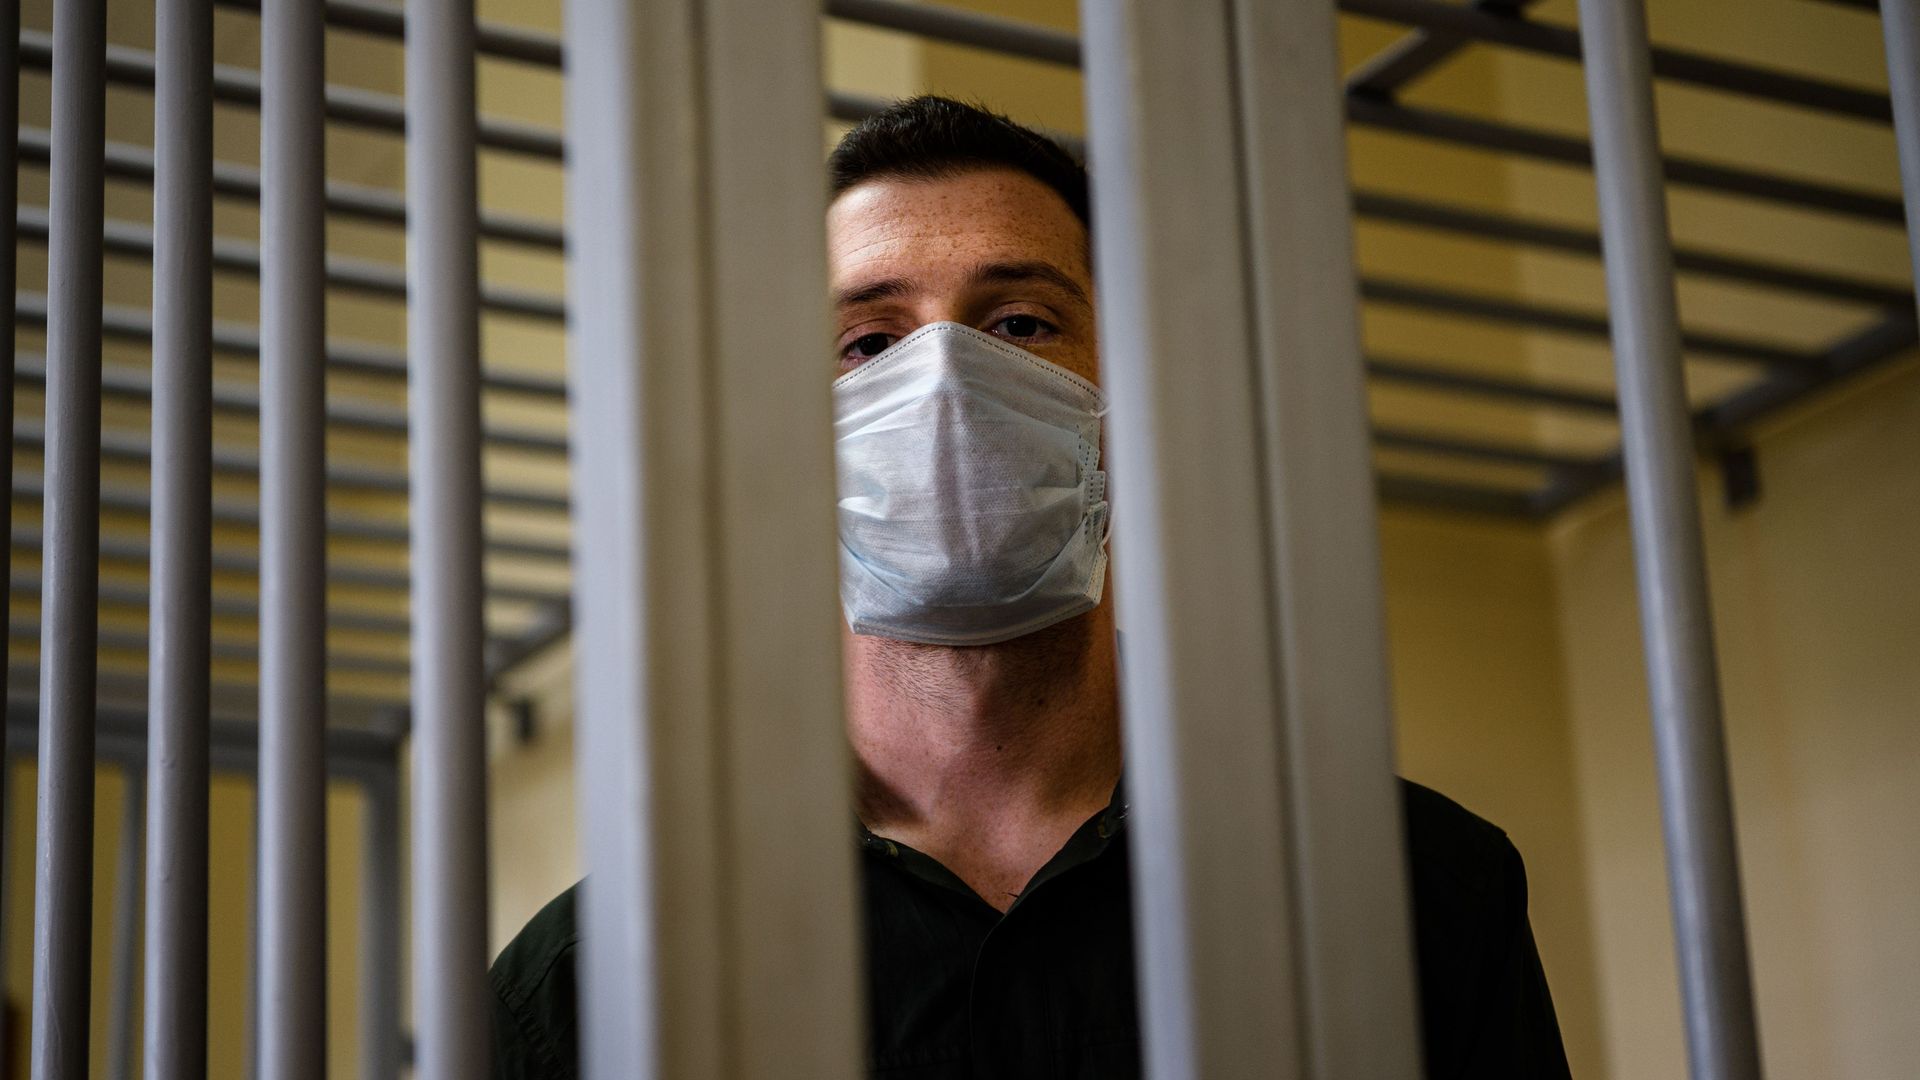 Former U.S. Marine Trevor Reed in a defendants' cage in a Moscow court in July 2020.